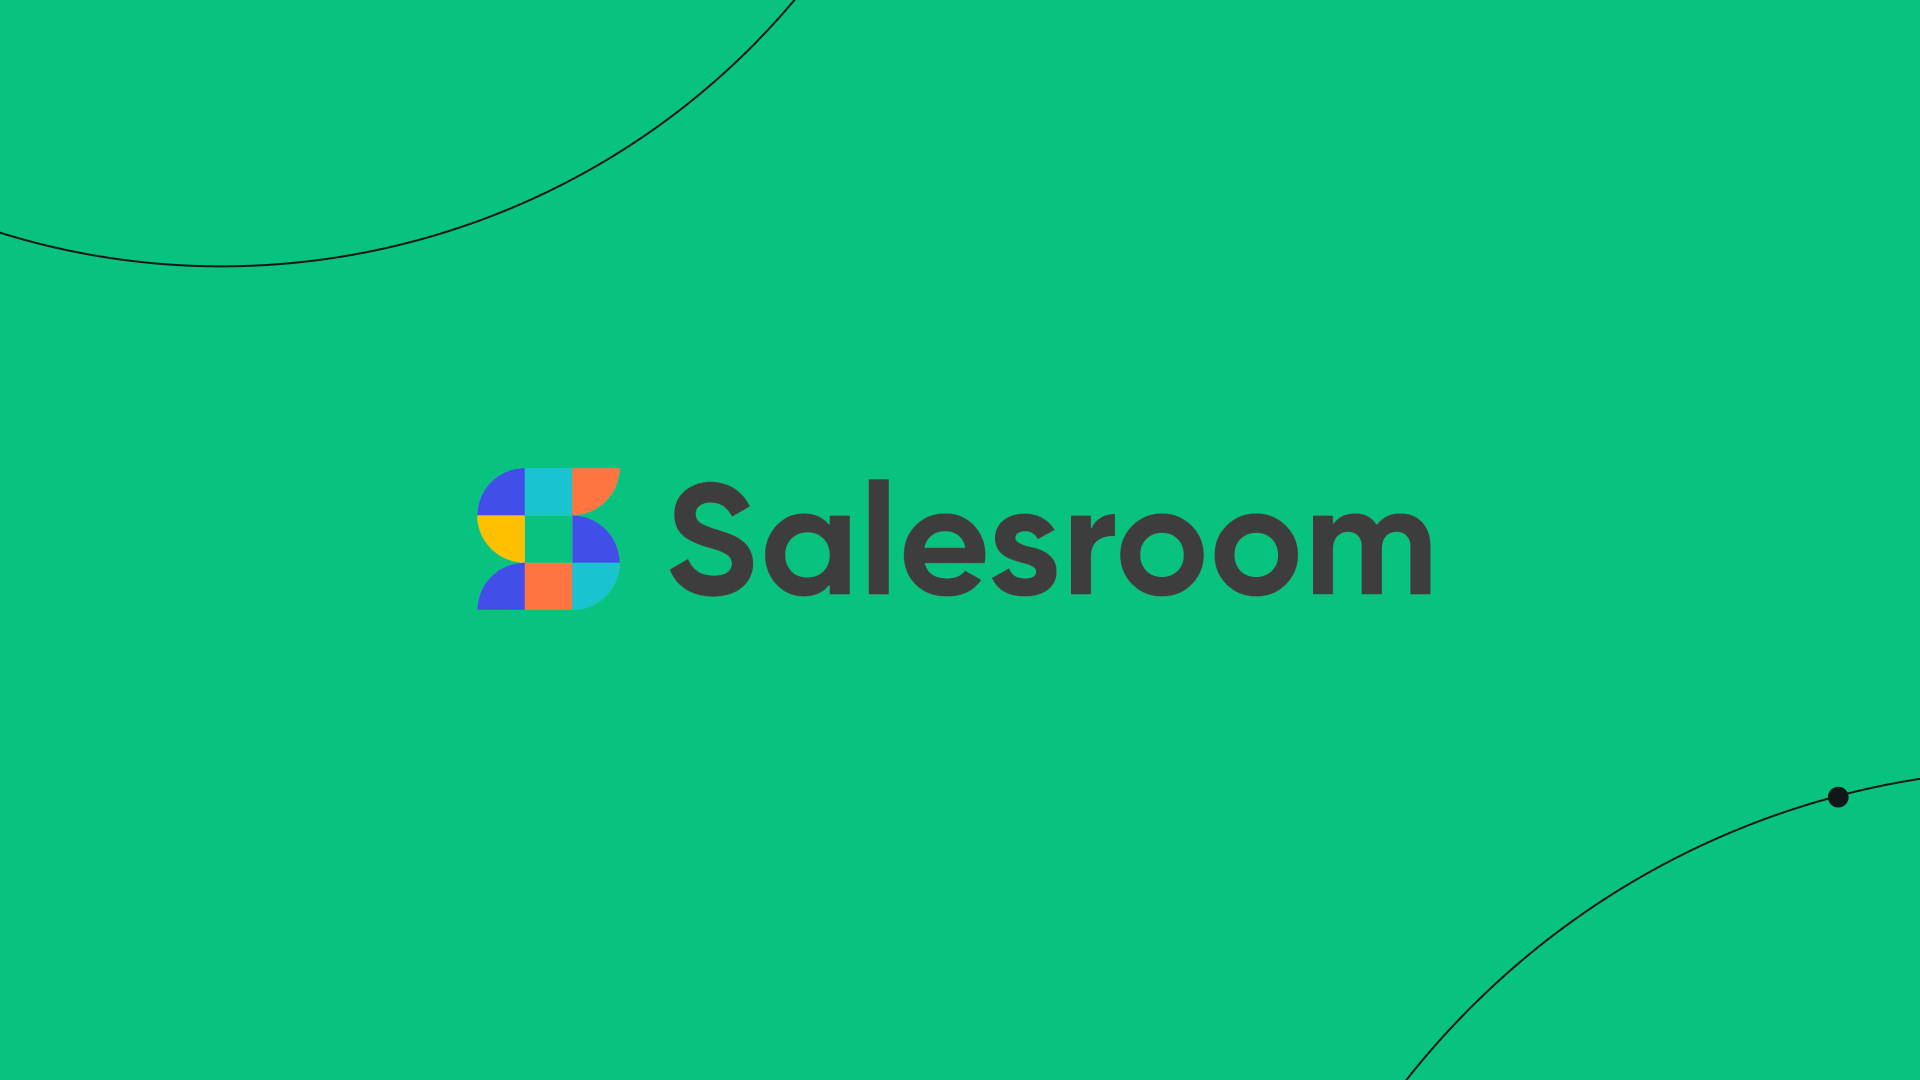 Salesroom: A case study on how a startup used Linearity to bring animation in-house